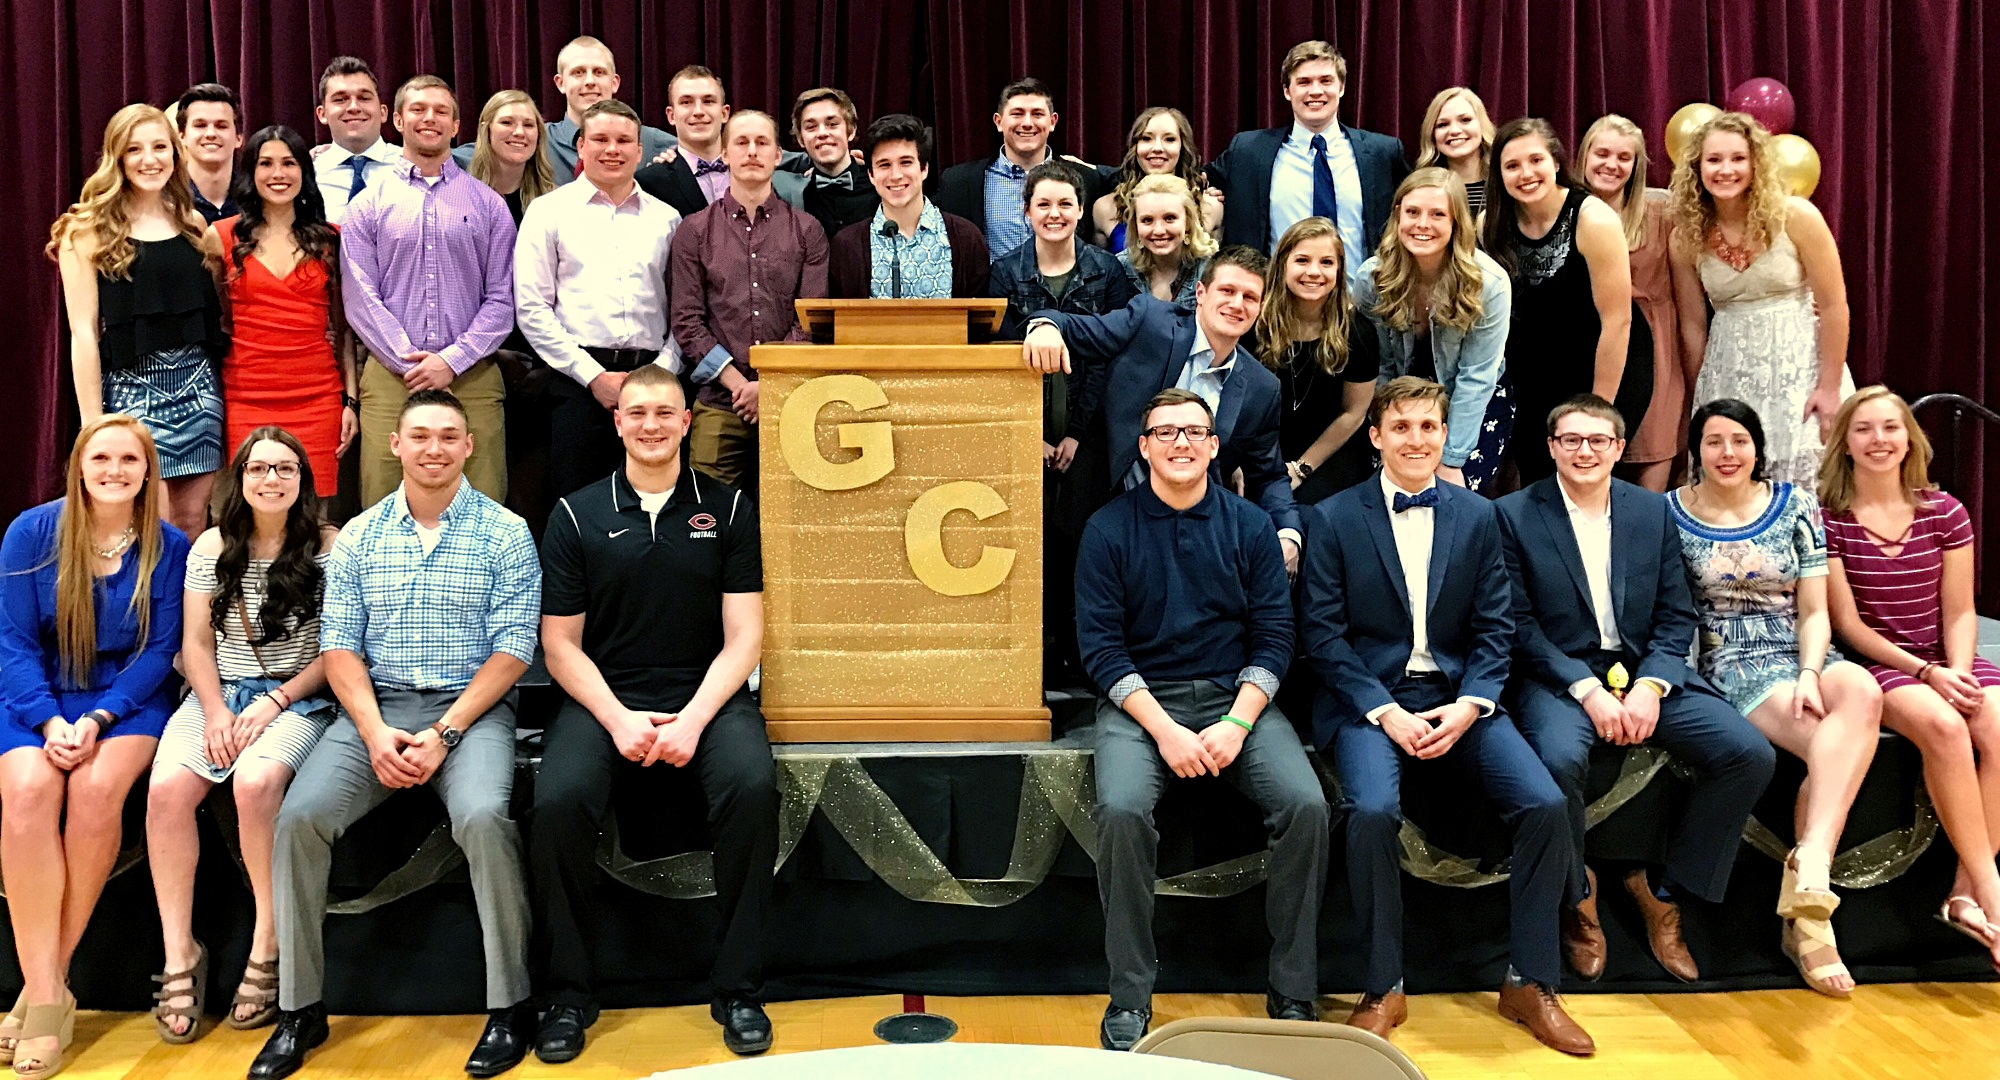 Members of the Cobber Student Athletic Advisory Council poses for a picture after the 5th annual Golden Cobbs award show.